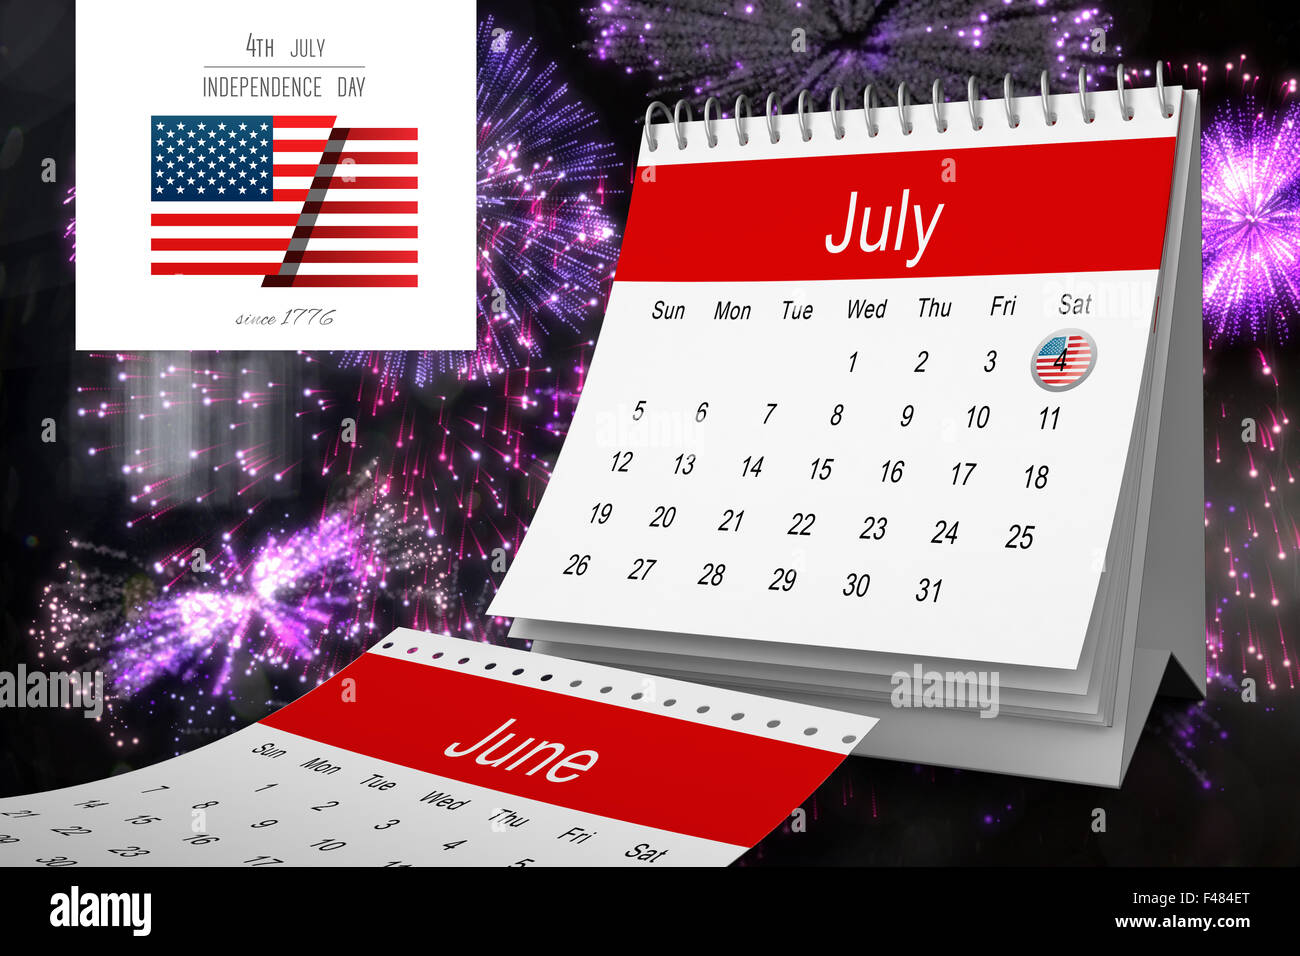 Composite image of independence day graphic Stock Photo